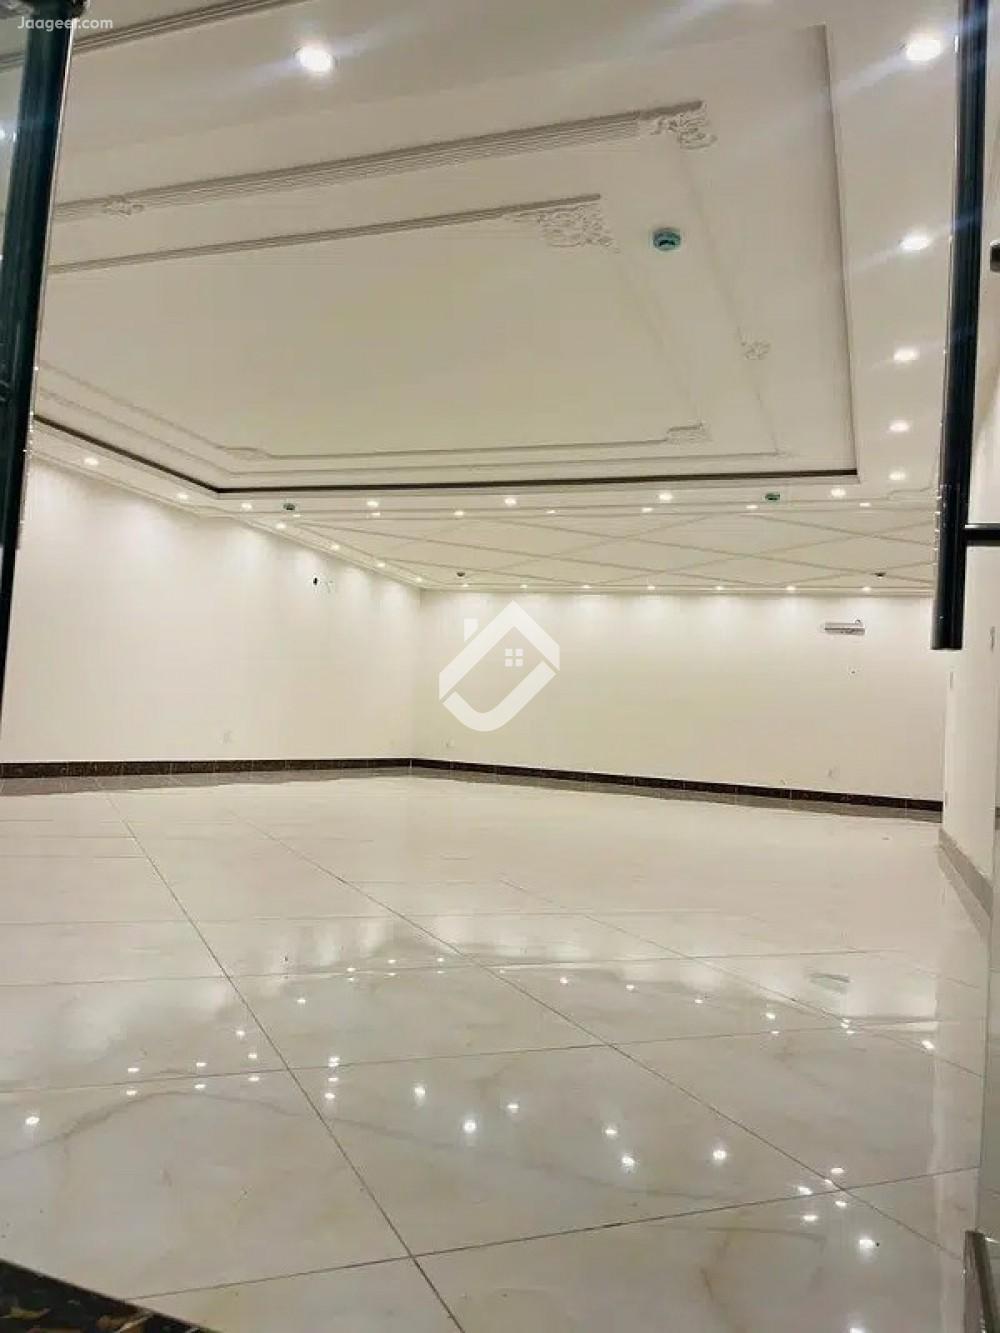 Main image 8 Marla Commercial Building For Sale  In DHA Phase 6  CCA Block DHA Phase 6, Lahore